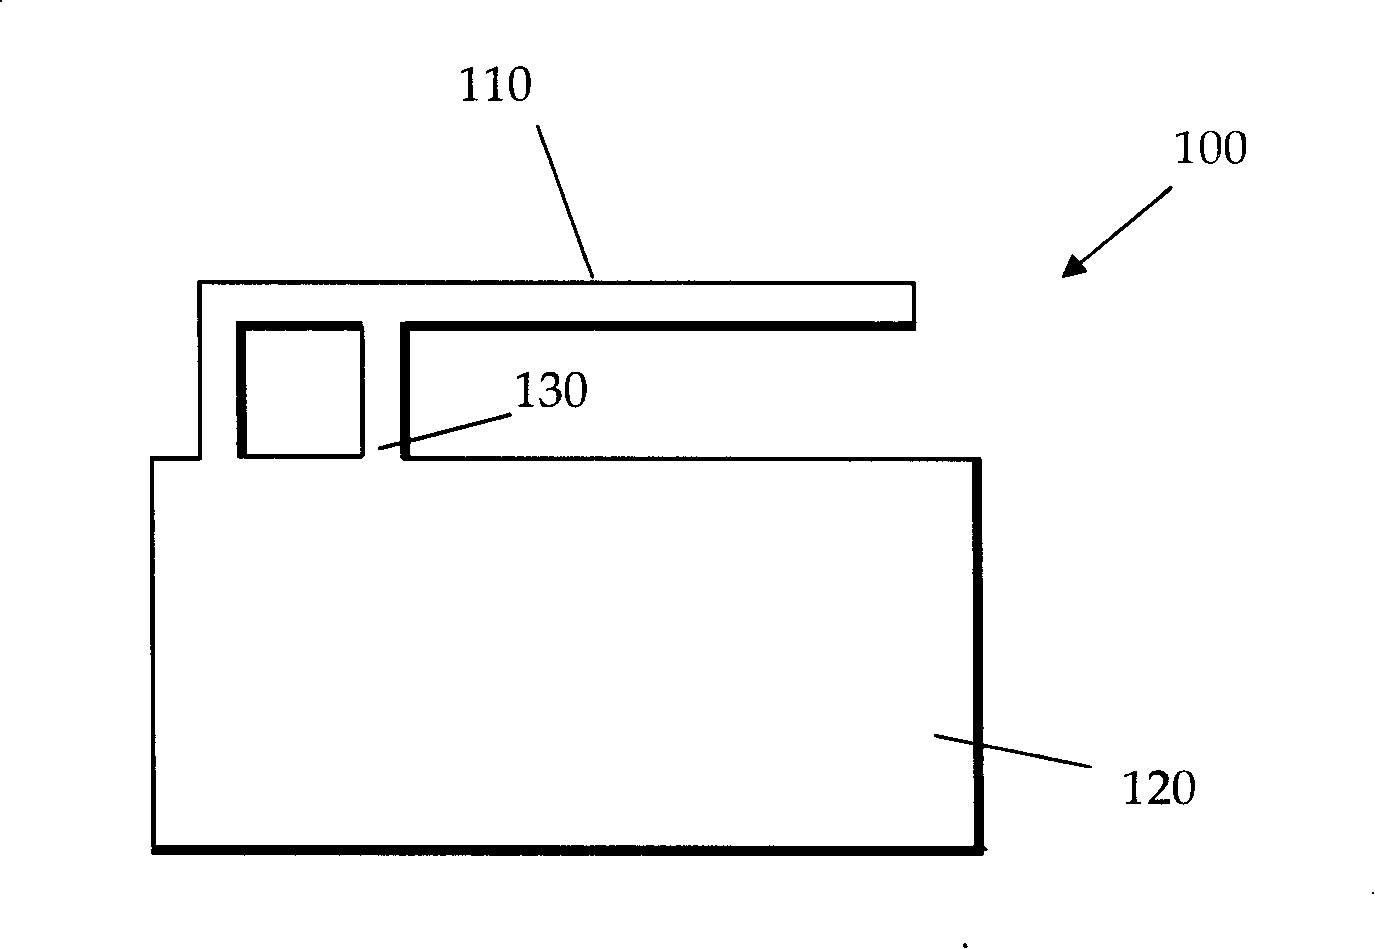 Four-ring type oppositely-positioned super small high gain planar antenna